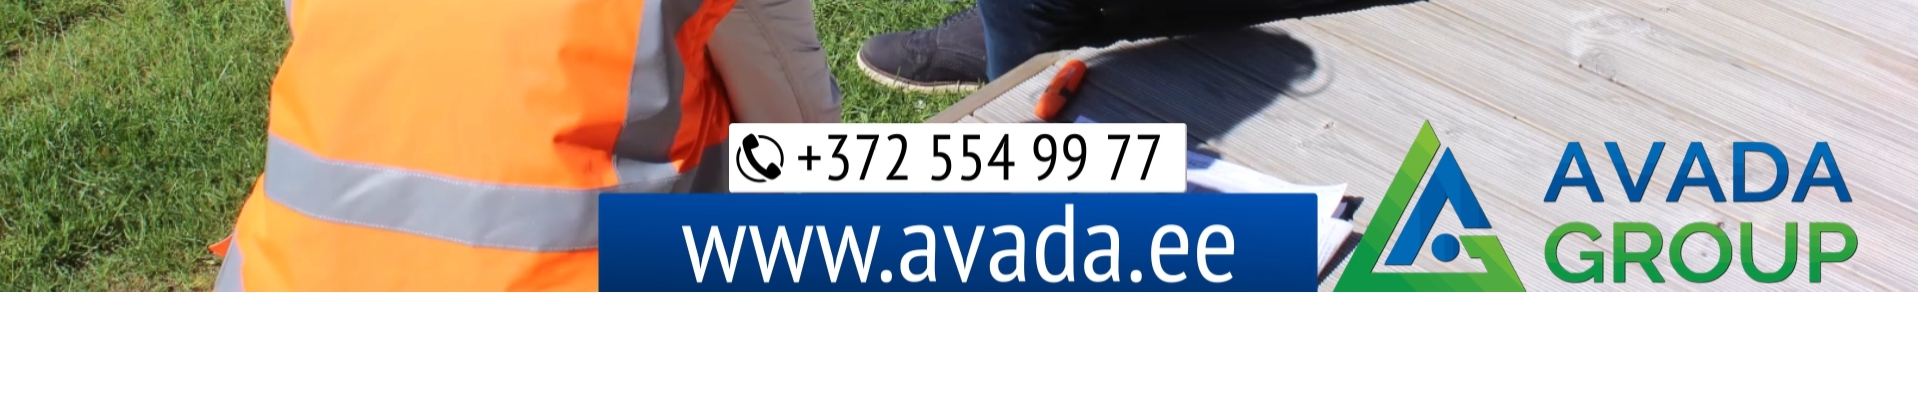 No tax arrears, court decisions missing, court hearings missing, fiscal year reports submitted. Main responsible spokesperson, info@avada.ee, +372 53670088